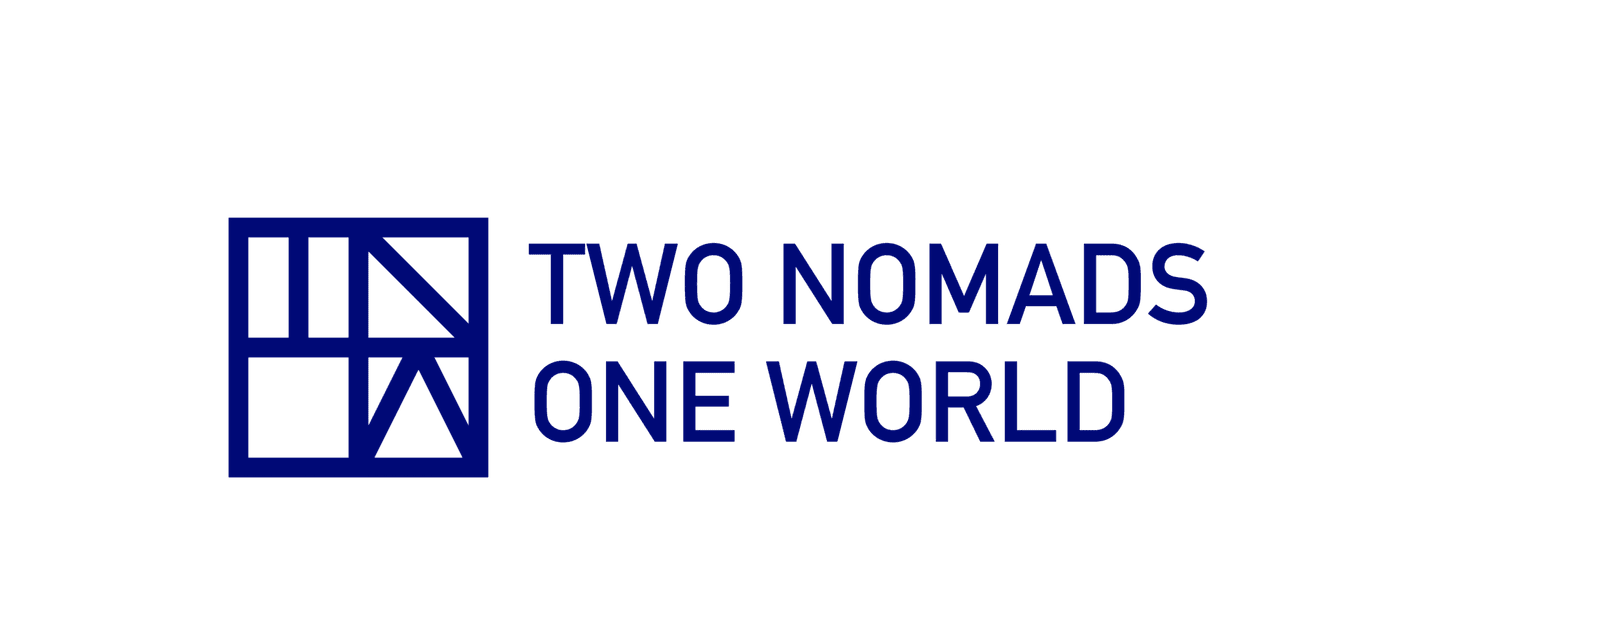 Two Nomads One World | Greece | Two Nomads One World